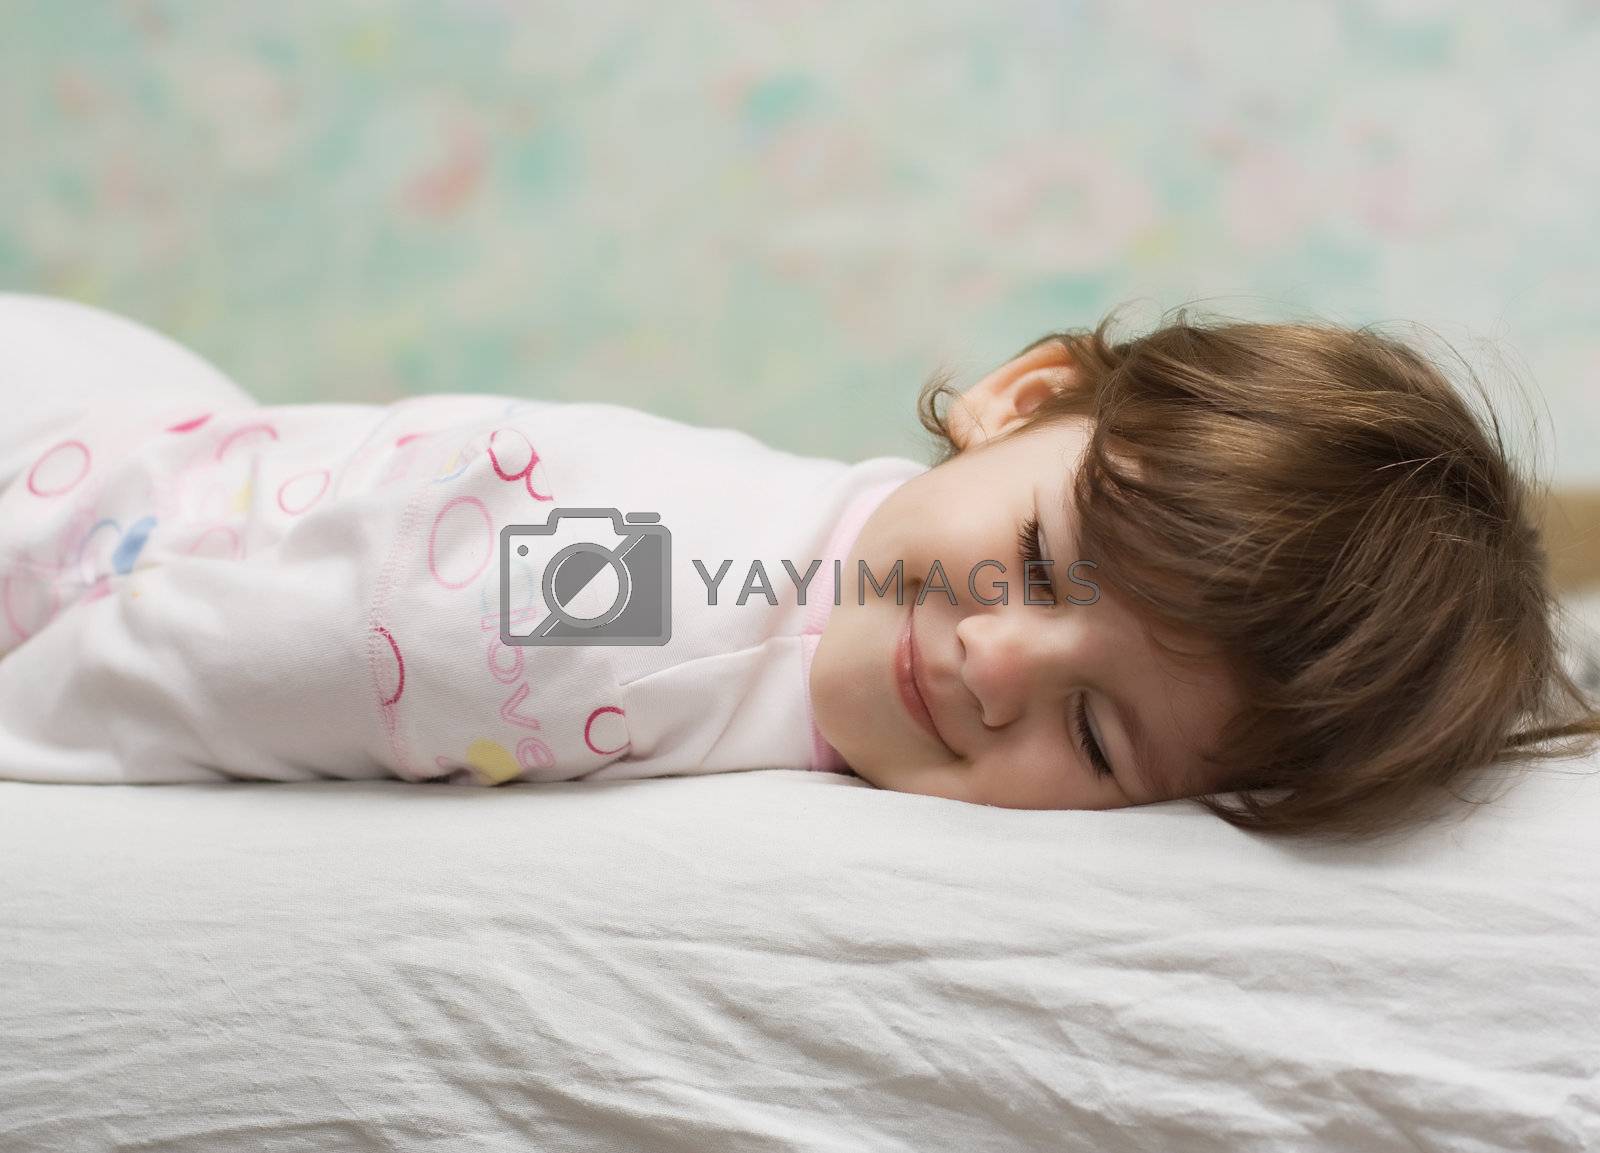 Royalty free image of sleeping child by aazz